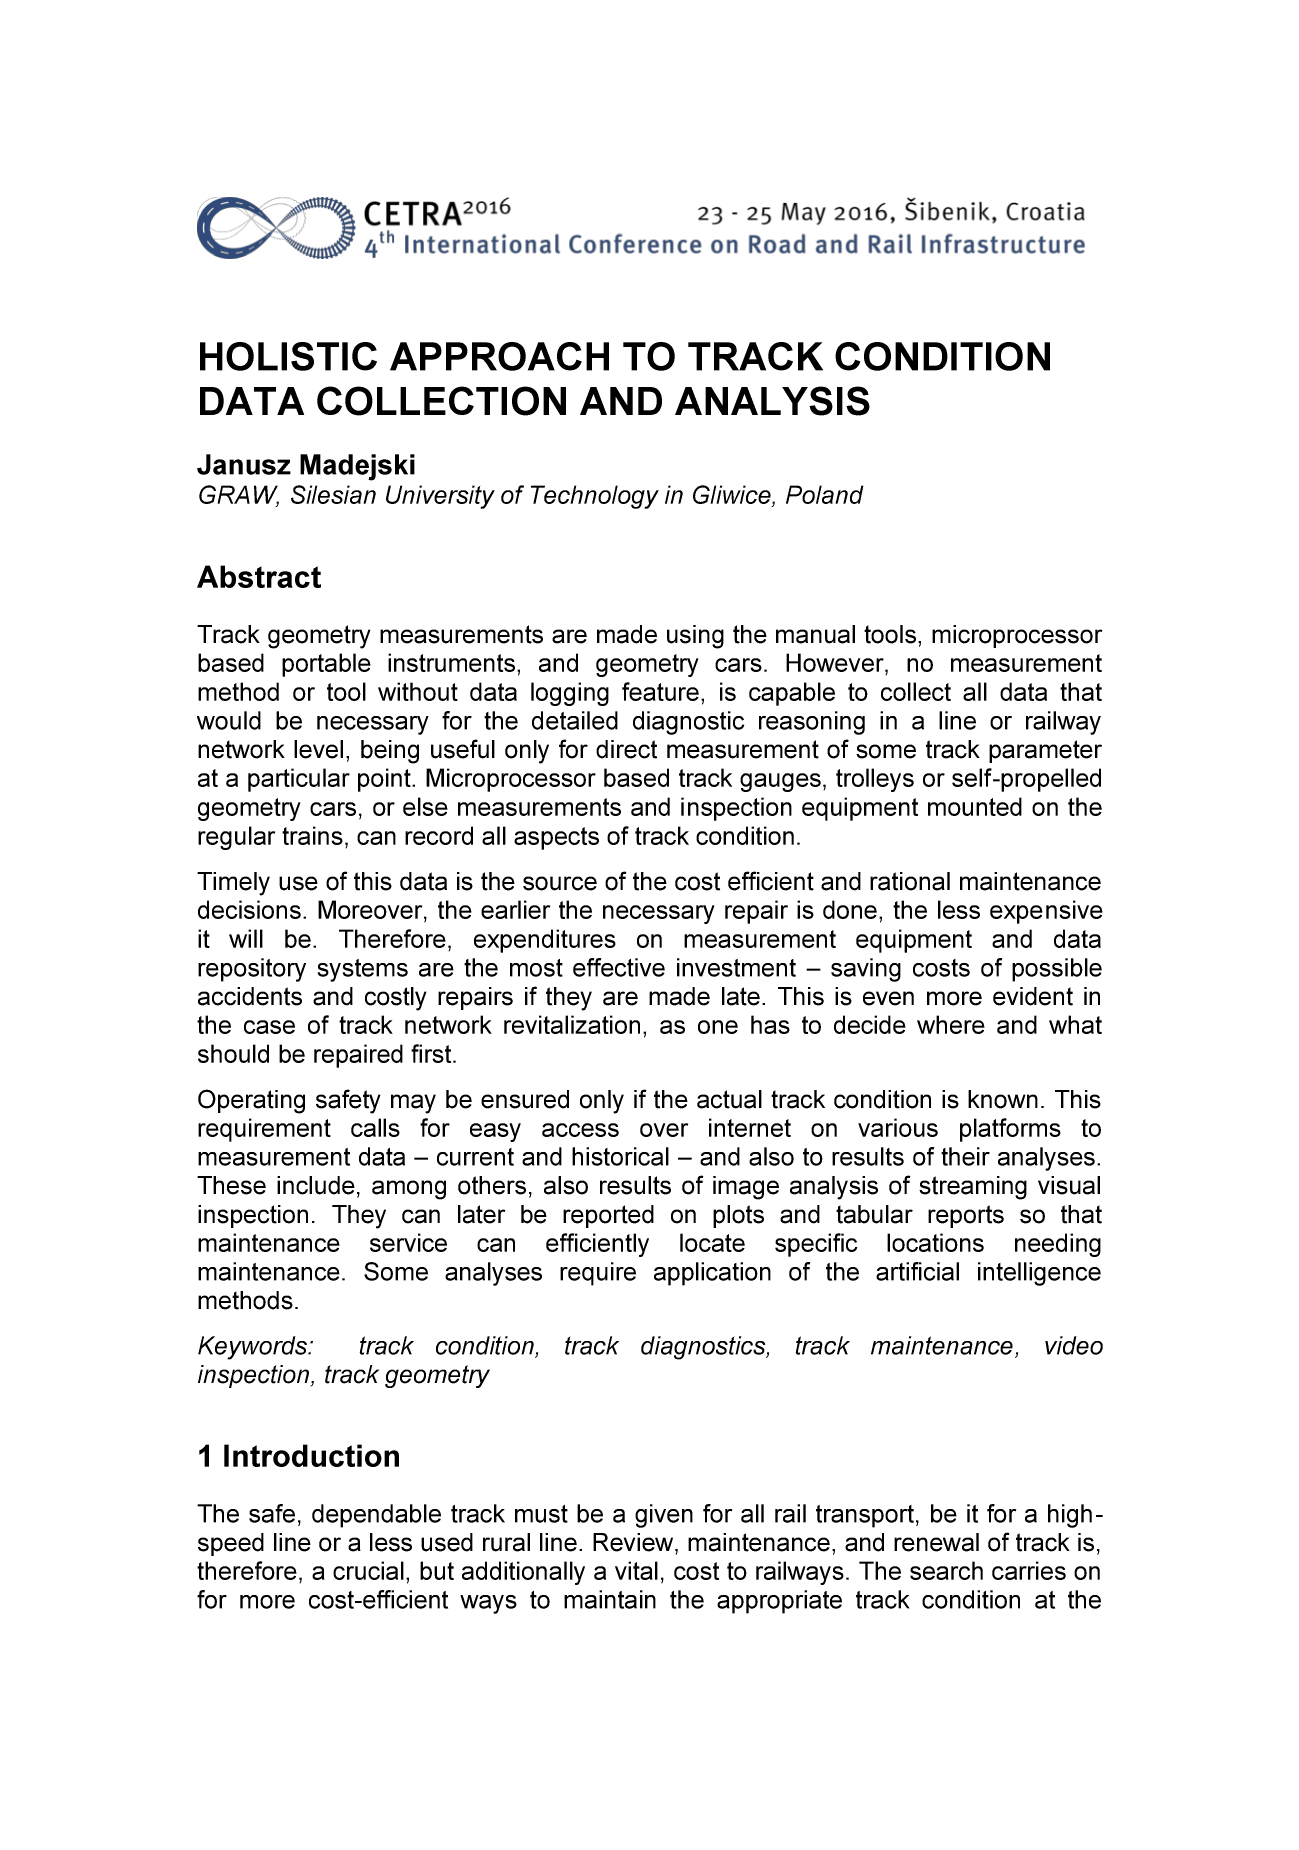 HOLISTIC APPROACH TO TRACK CONDITION DATA COLLECTION AND ANALYSIS